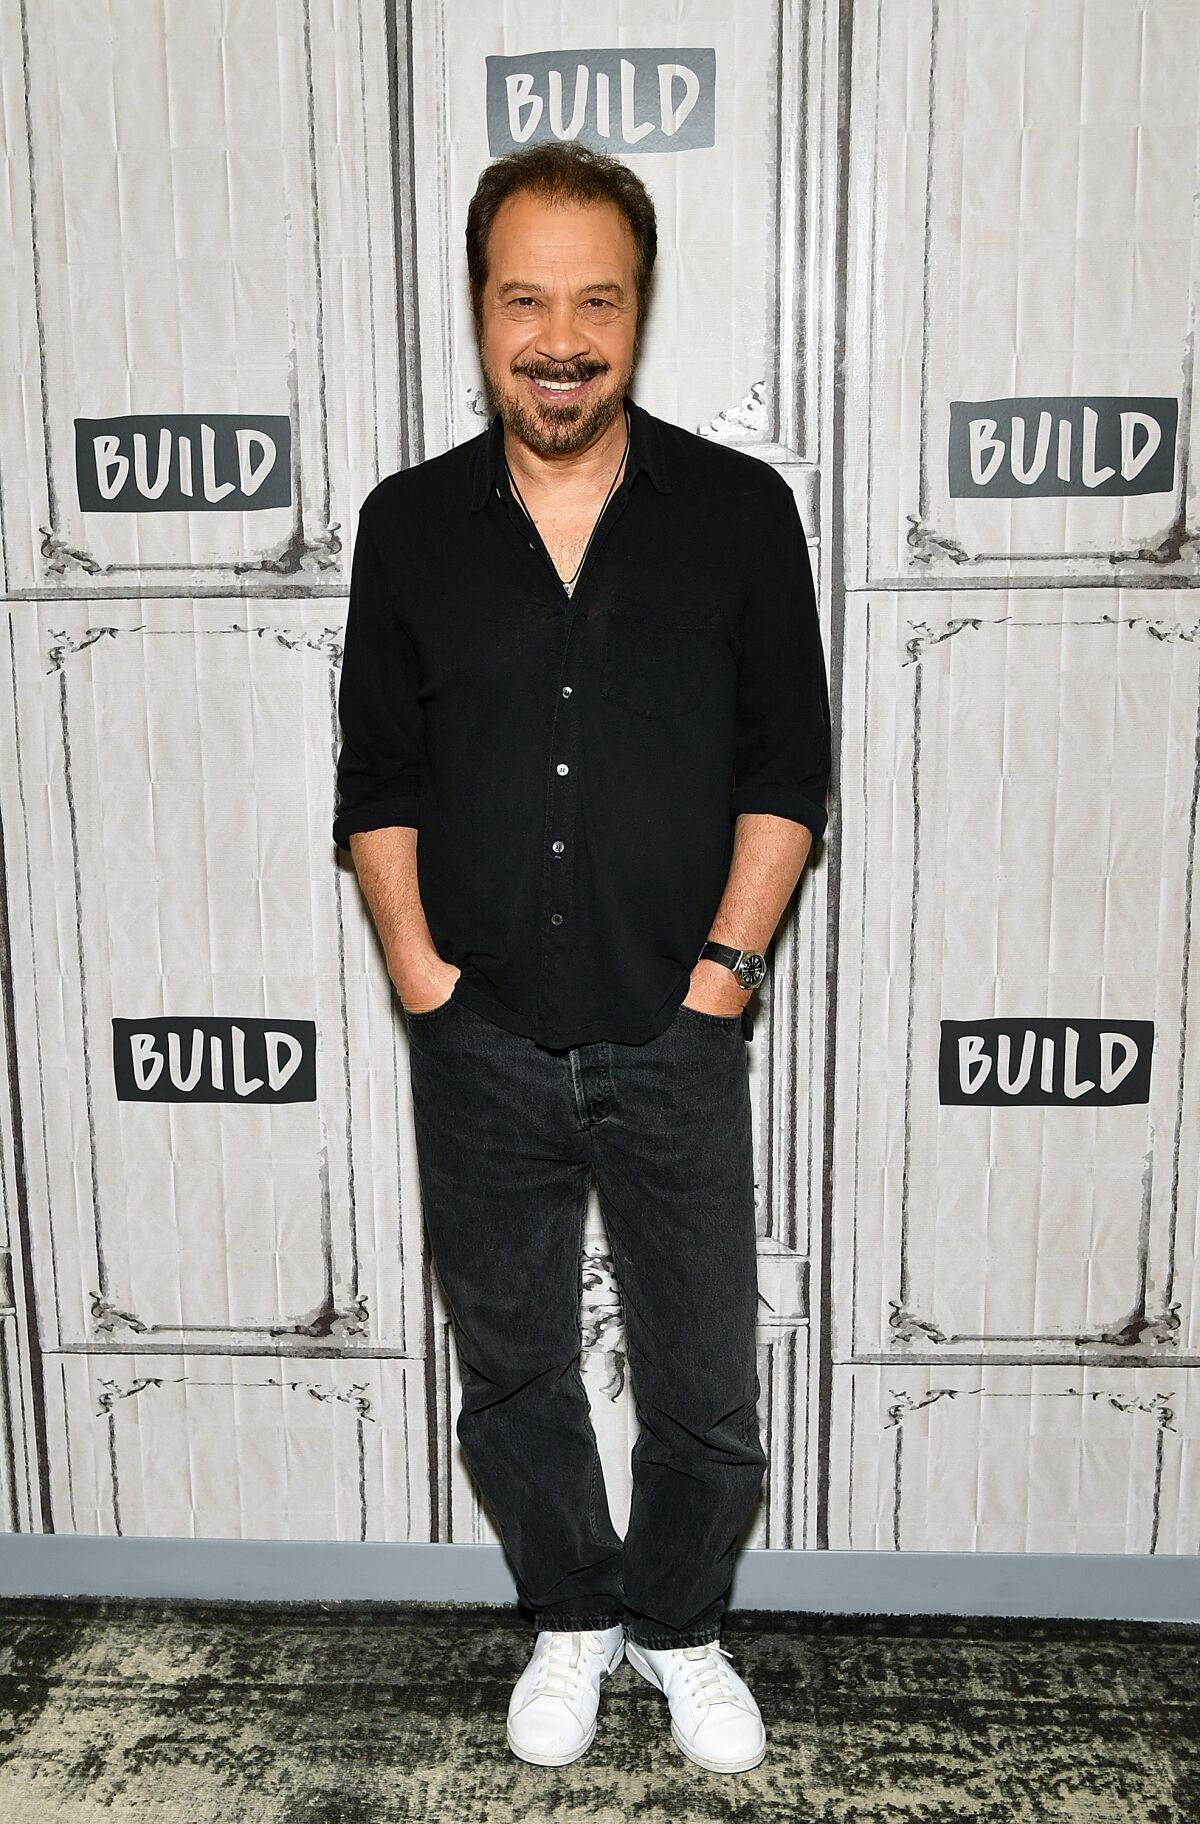 A man in a black shirt and pants smiles while standing with his hands in his pockets